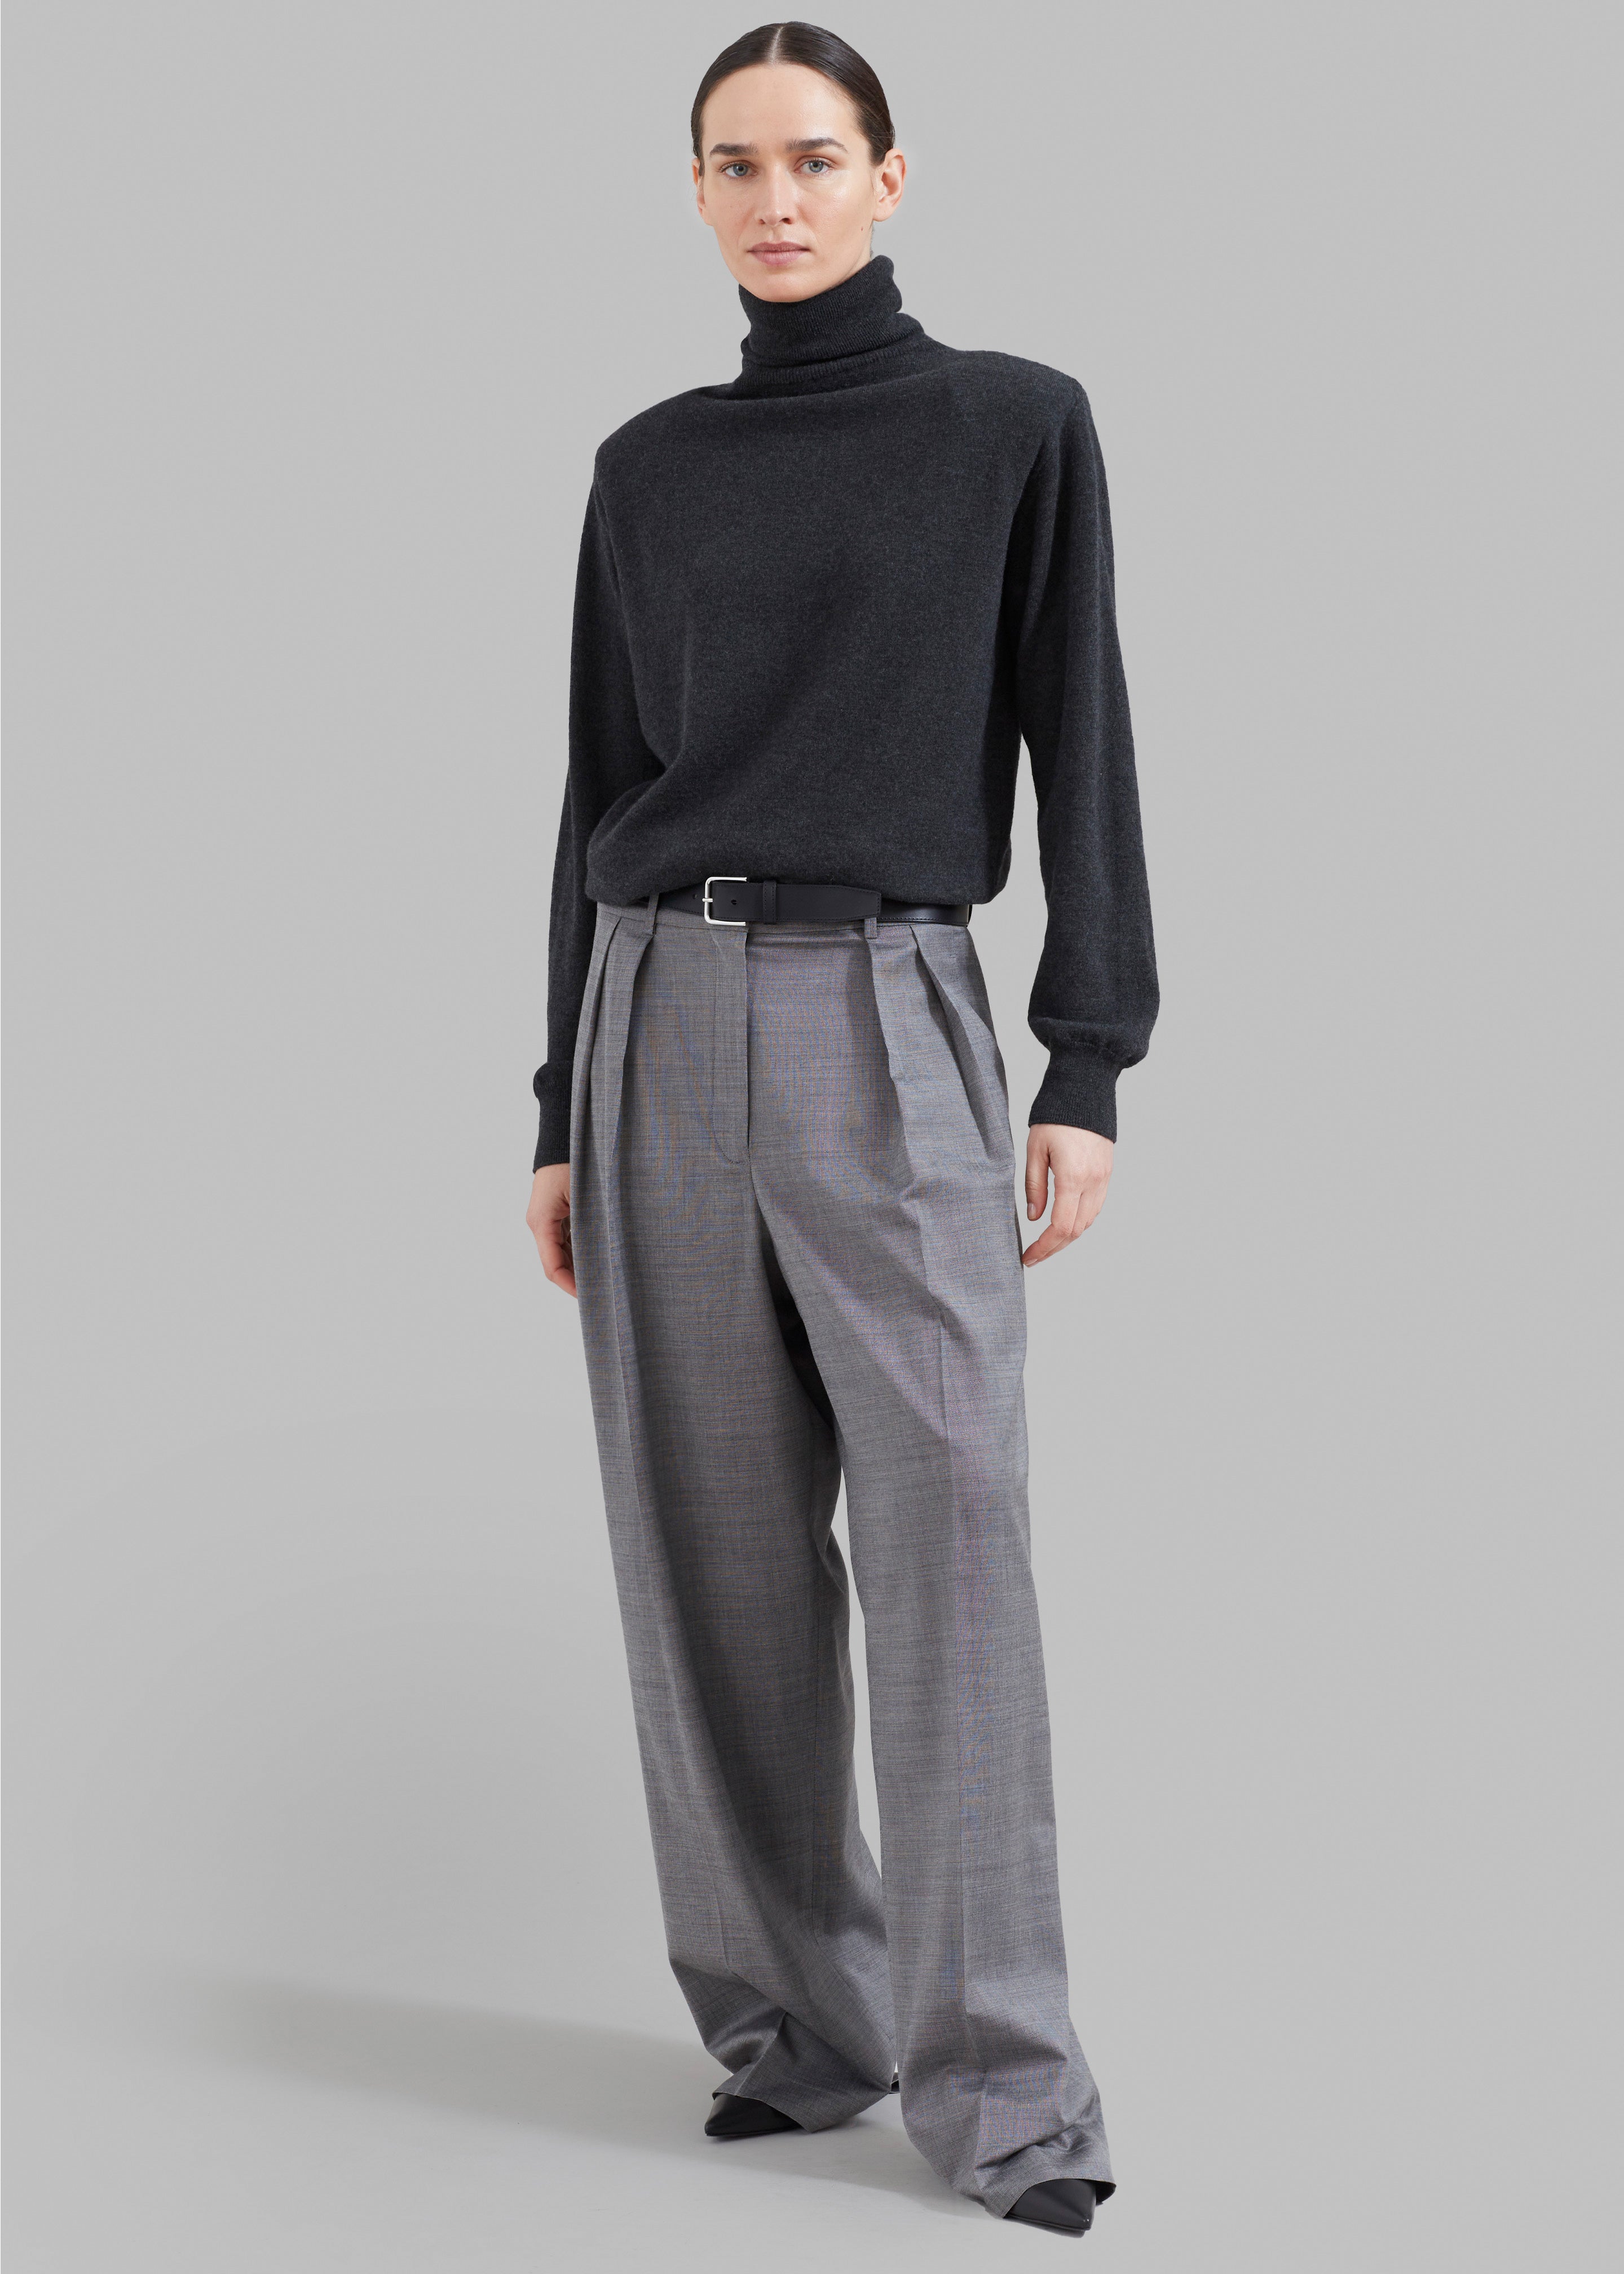 Ines Thin Padded Turtleneck - Charcoal - 5